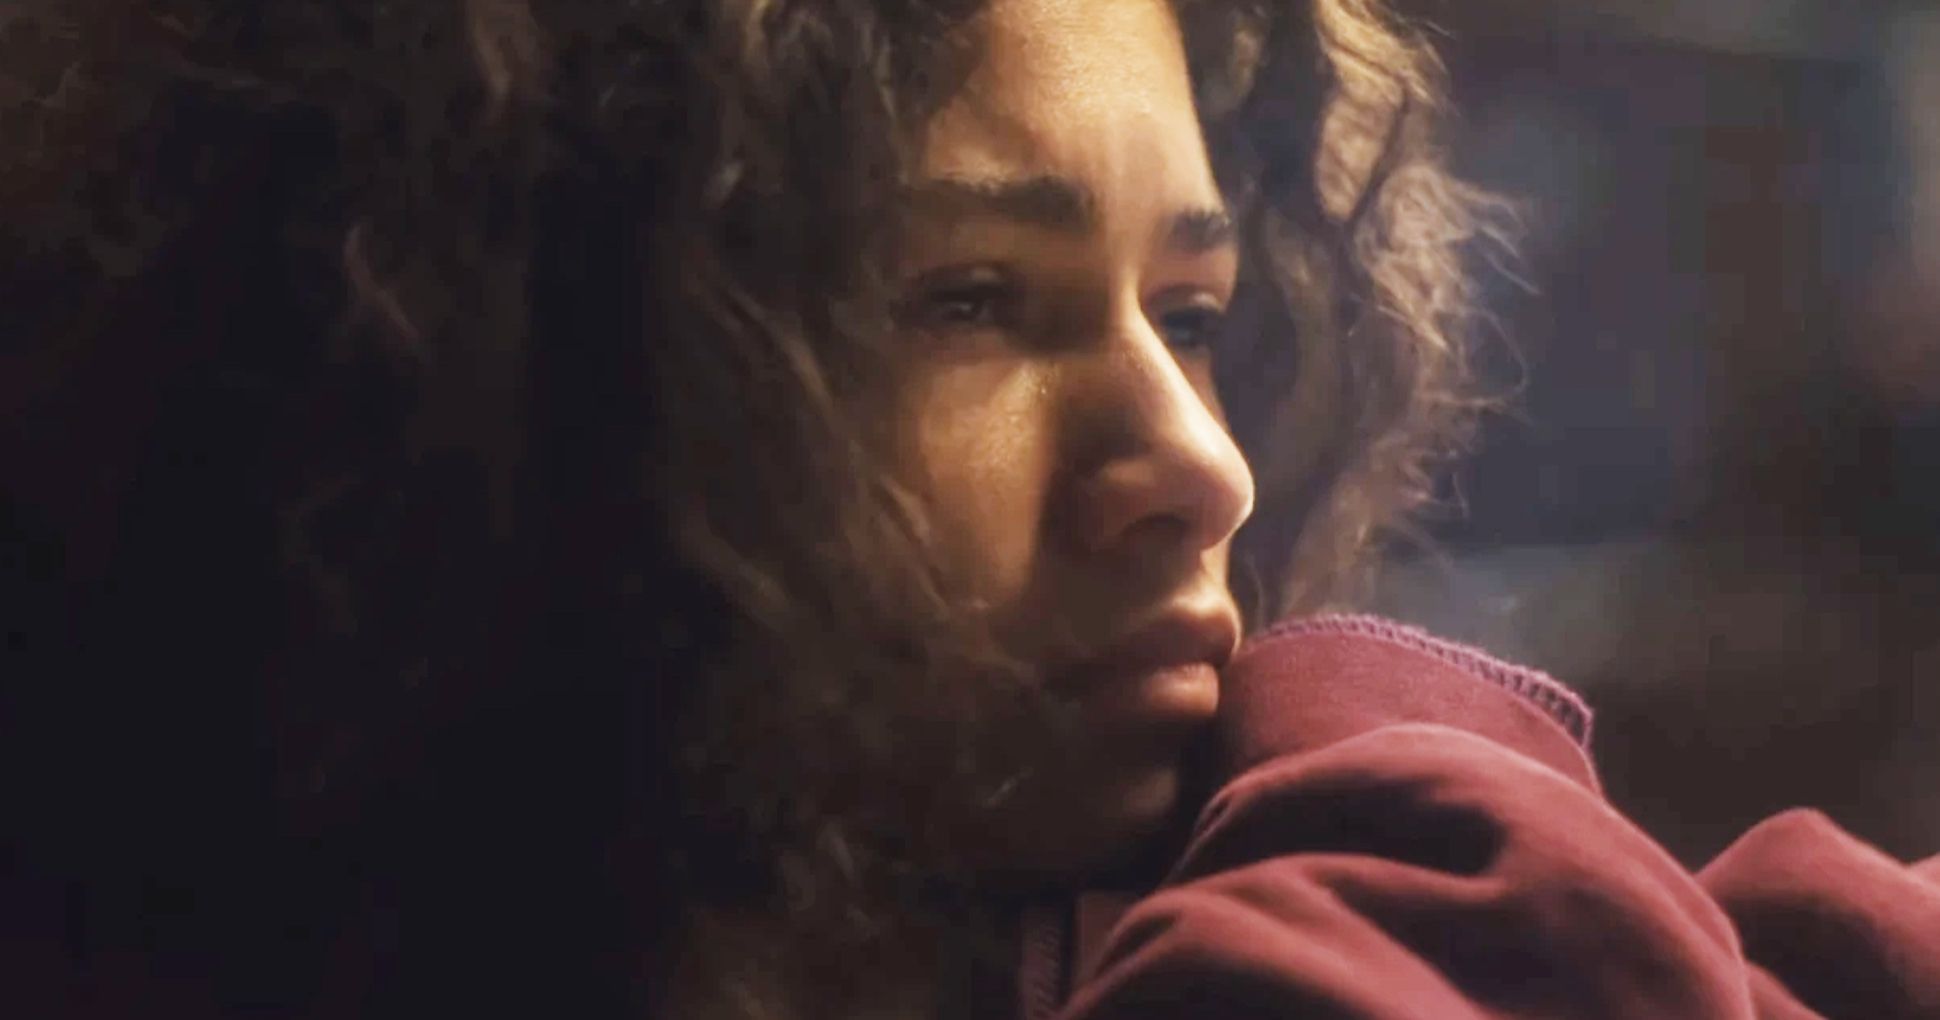 Euphoria Holiday Special Trailer Is All About Letting Go This Christmas Season